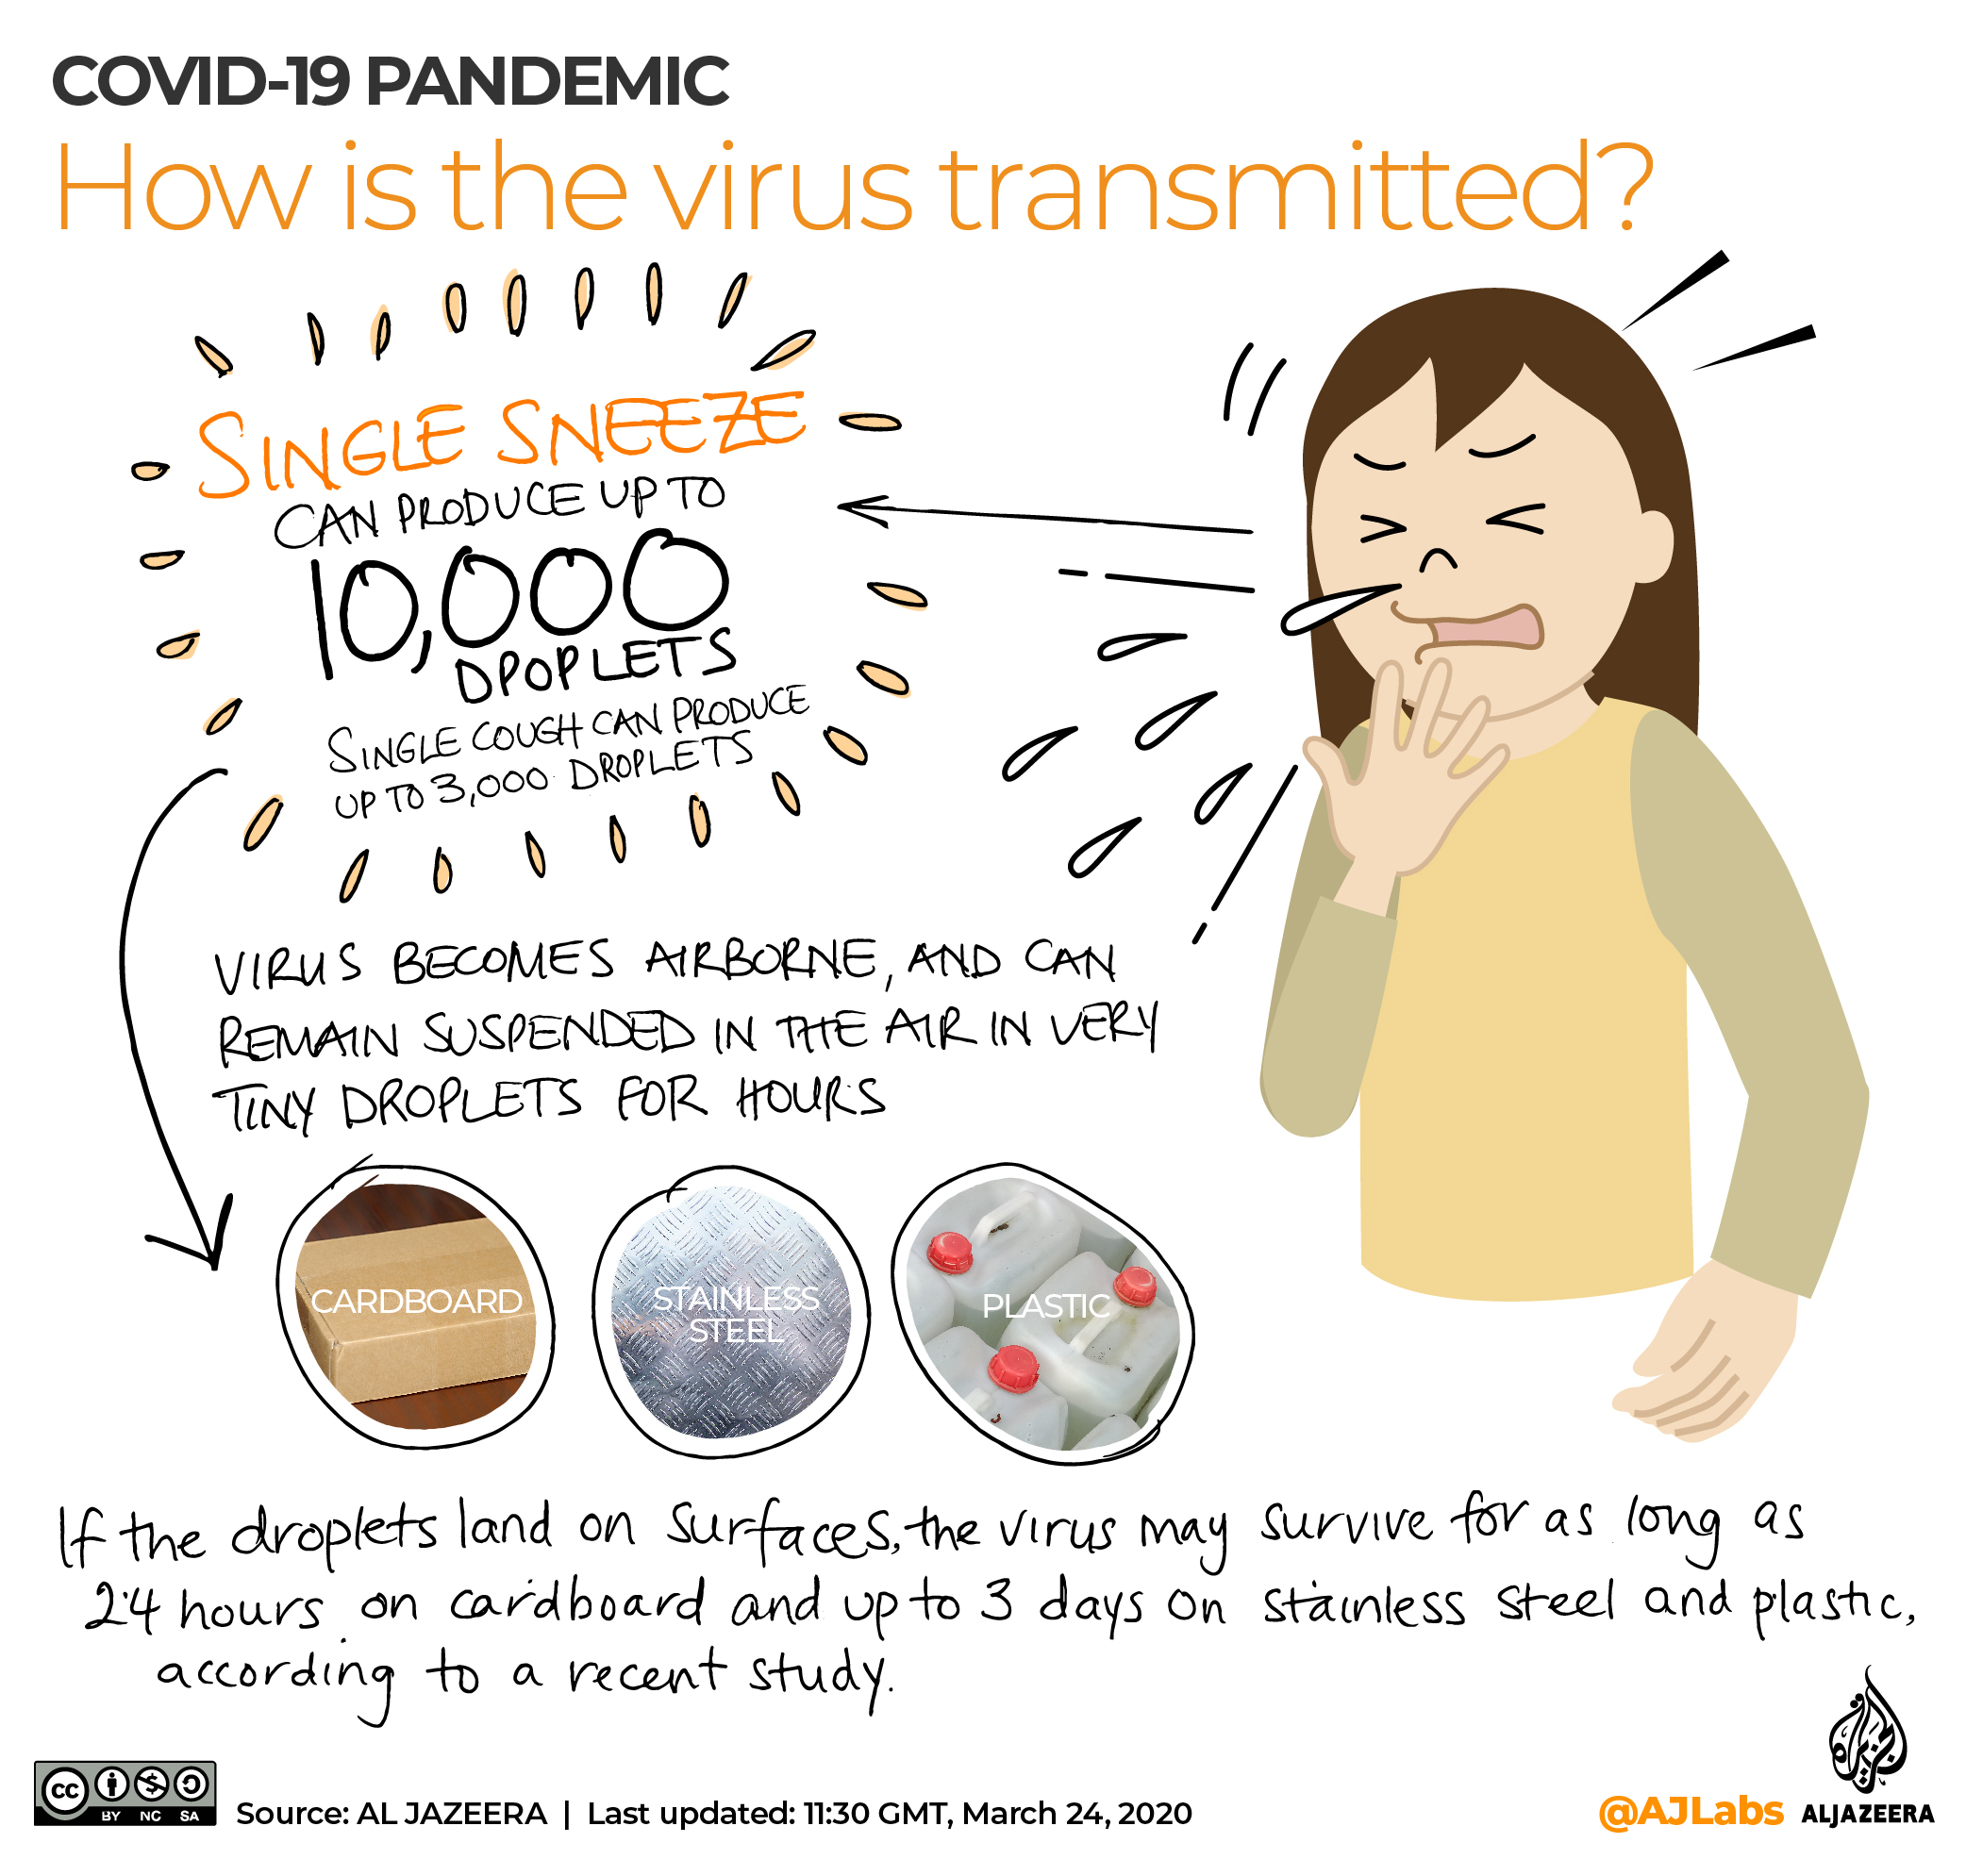 INTERACTIVE: Covid-19 doctor's note - How does the virus transmit 